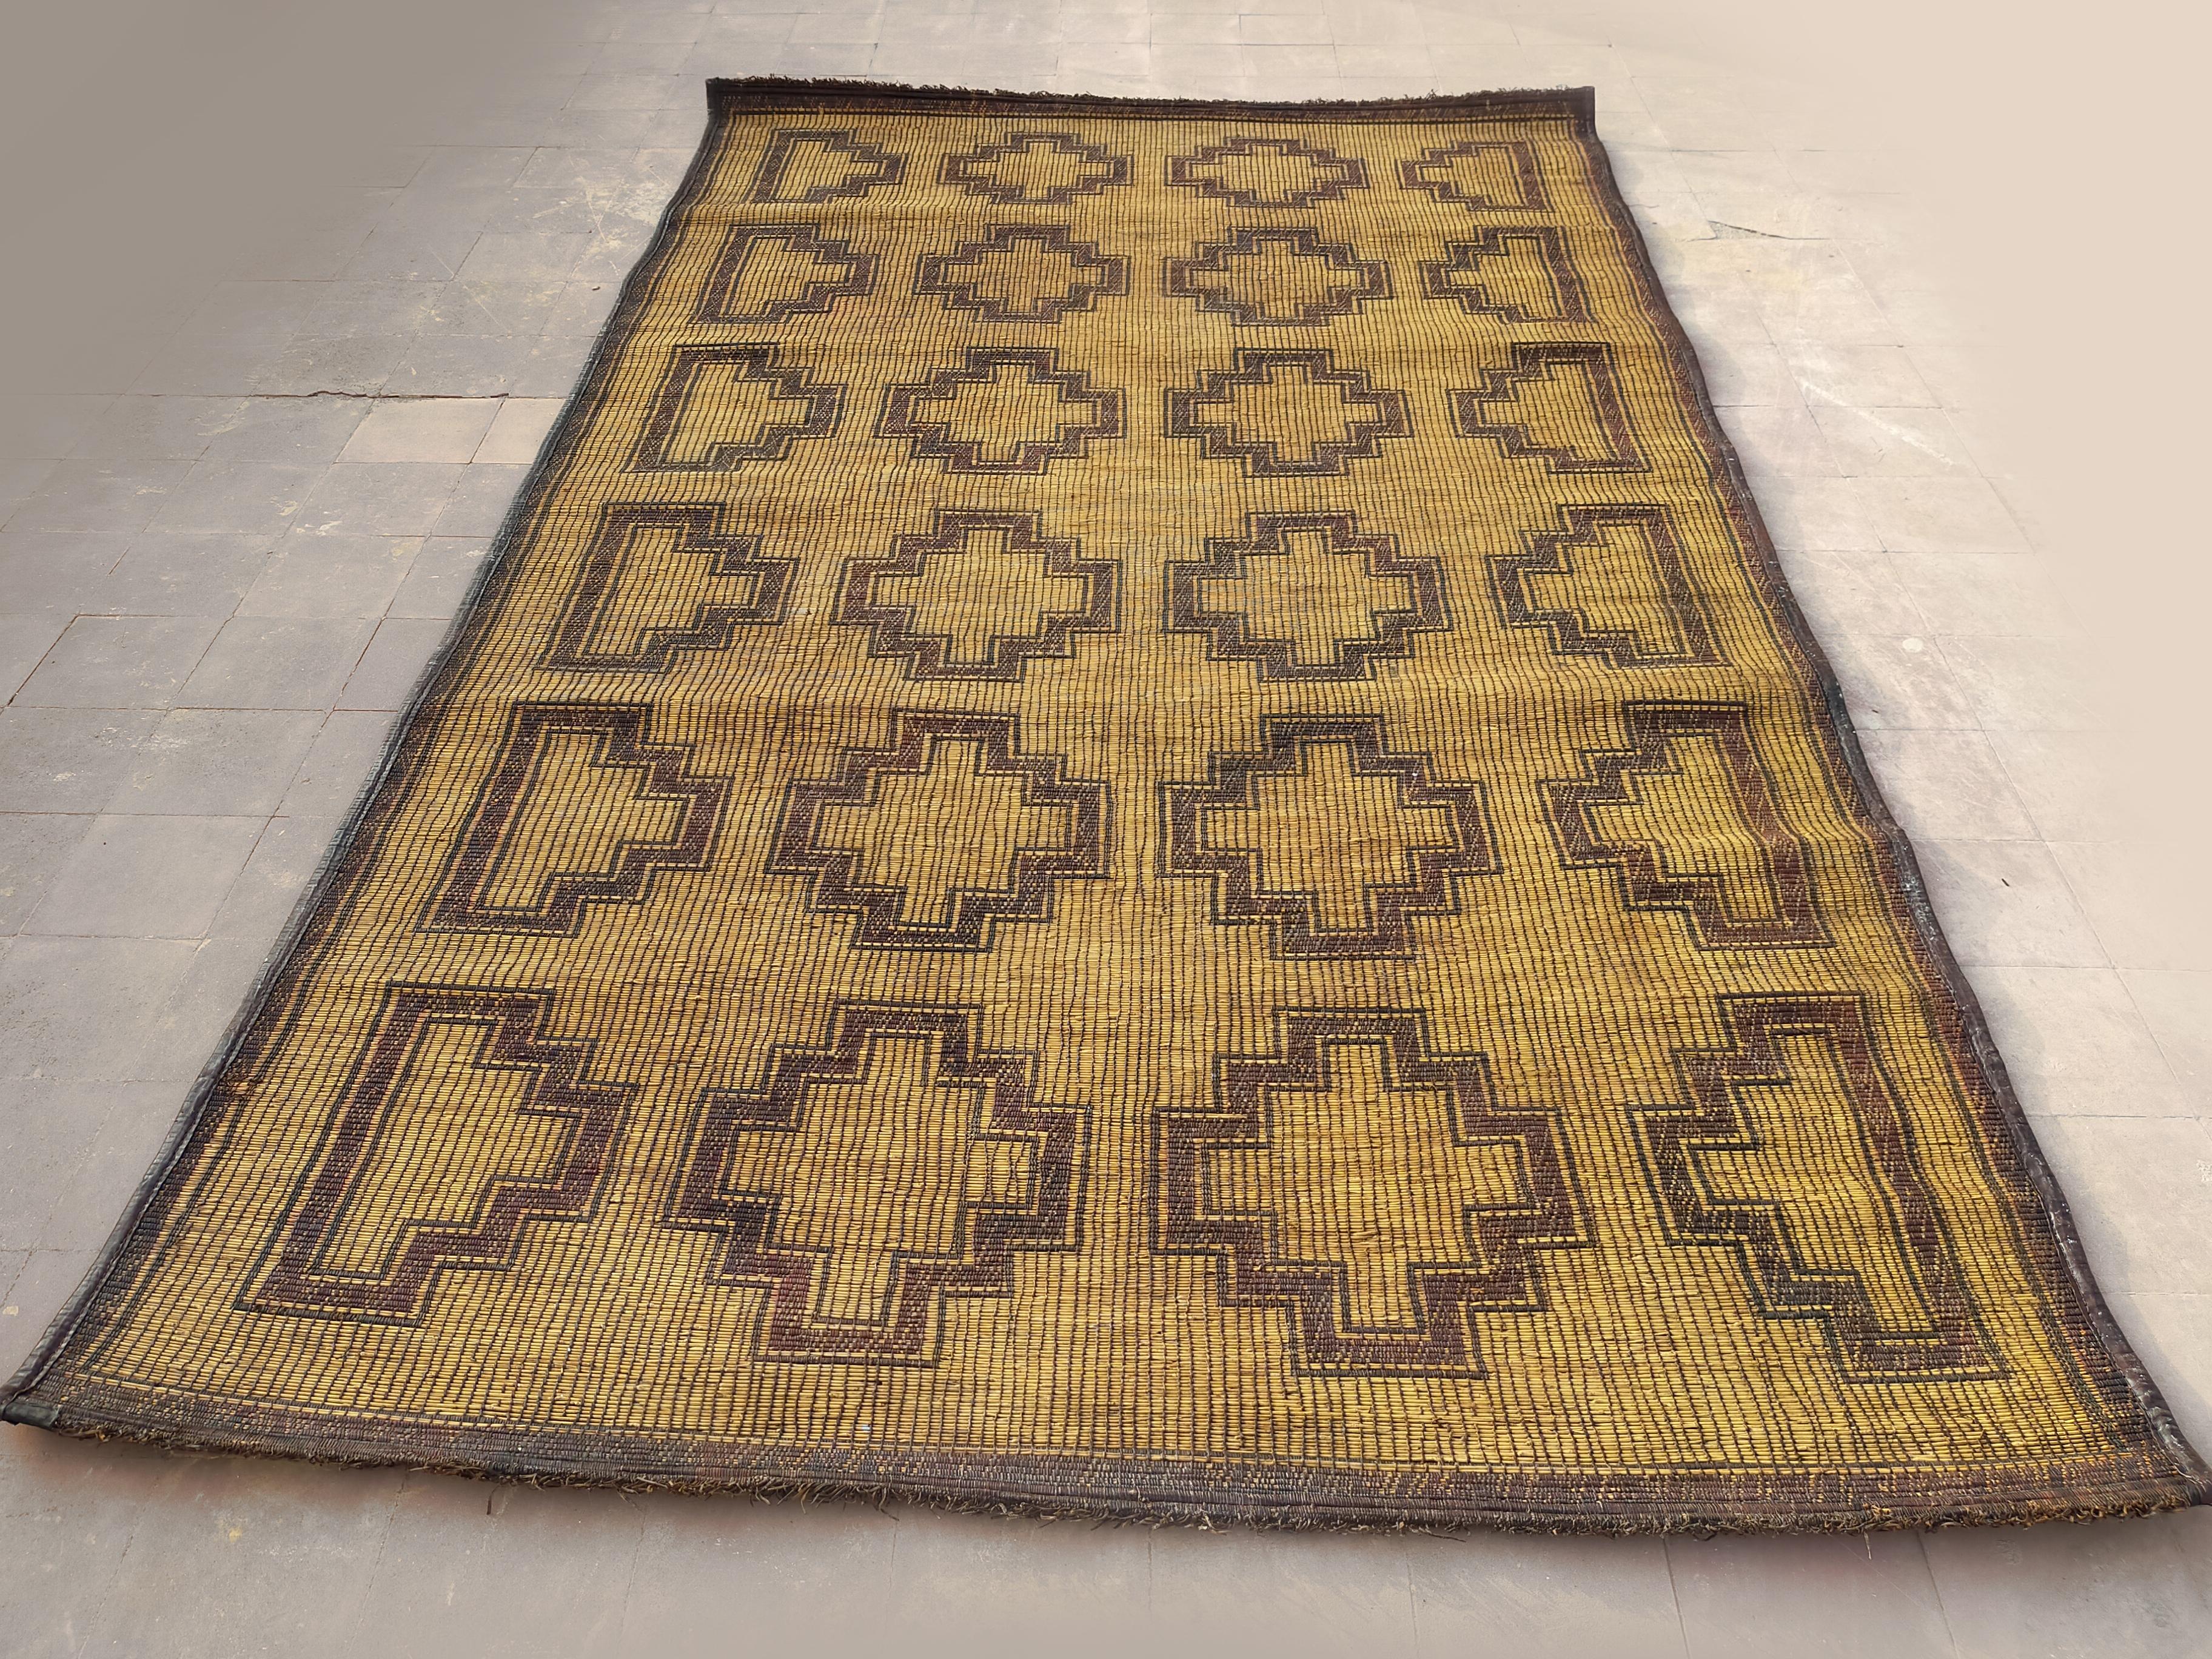 Mauritanian Mauritania Mat from Sahara in Palm Wood and Leather, Mid-Century Modern Design